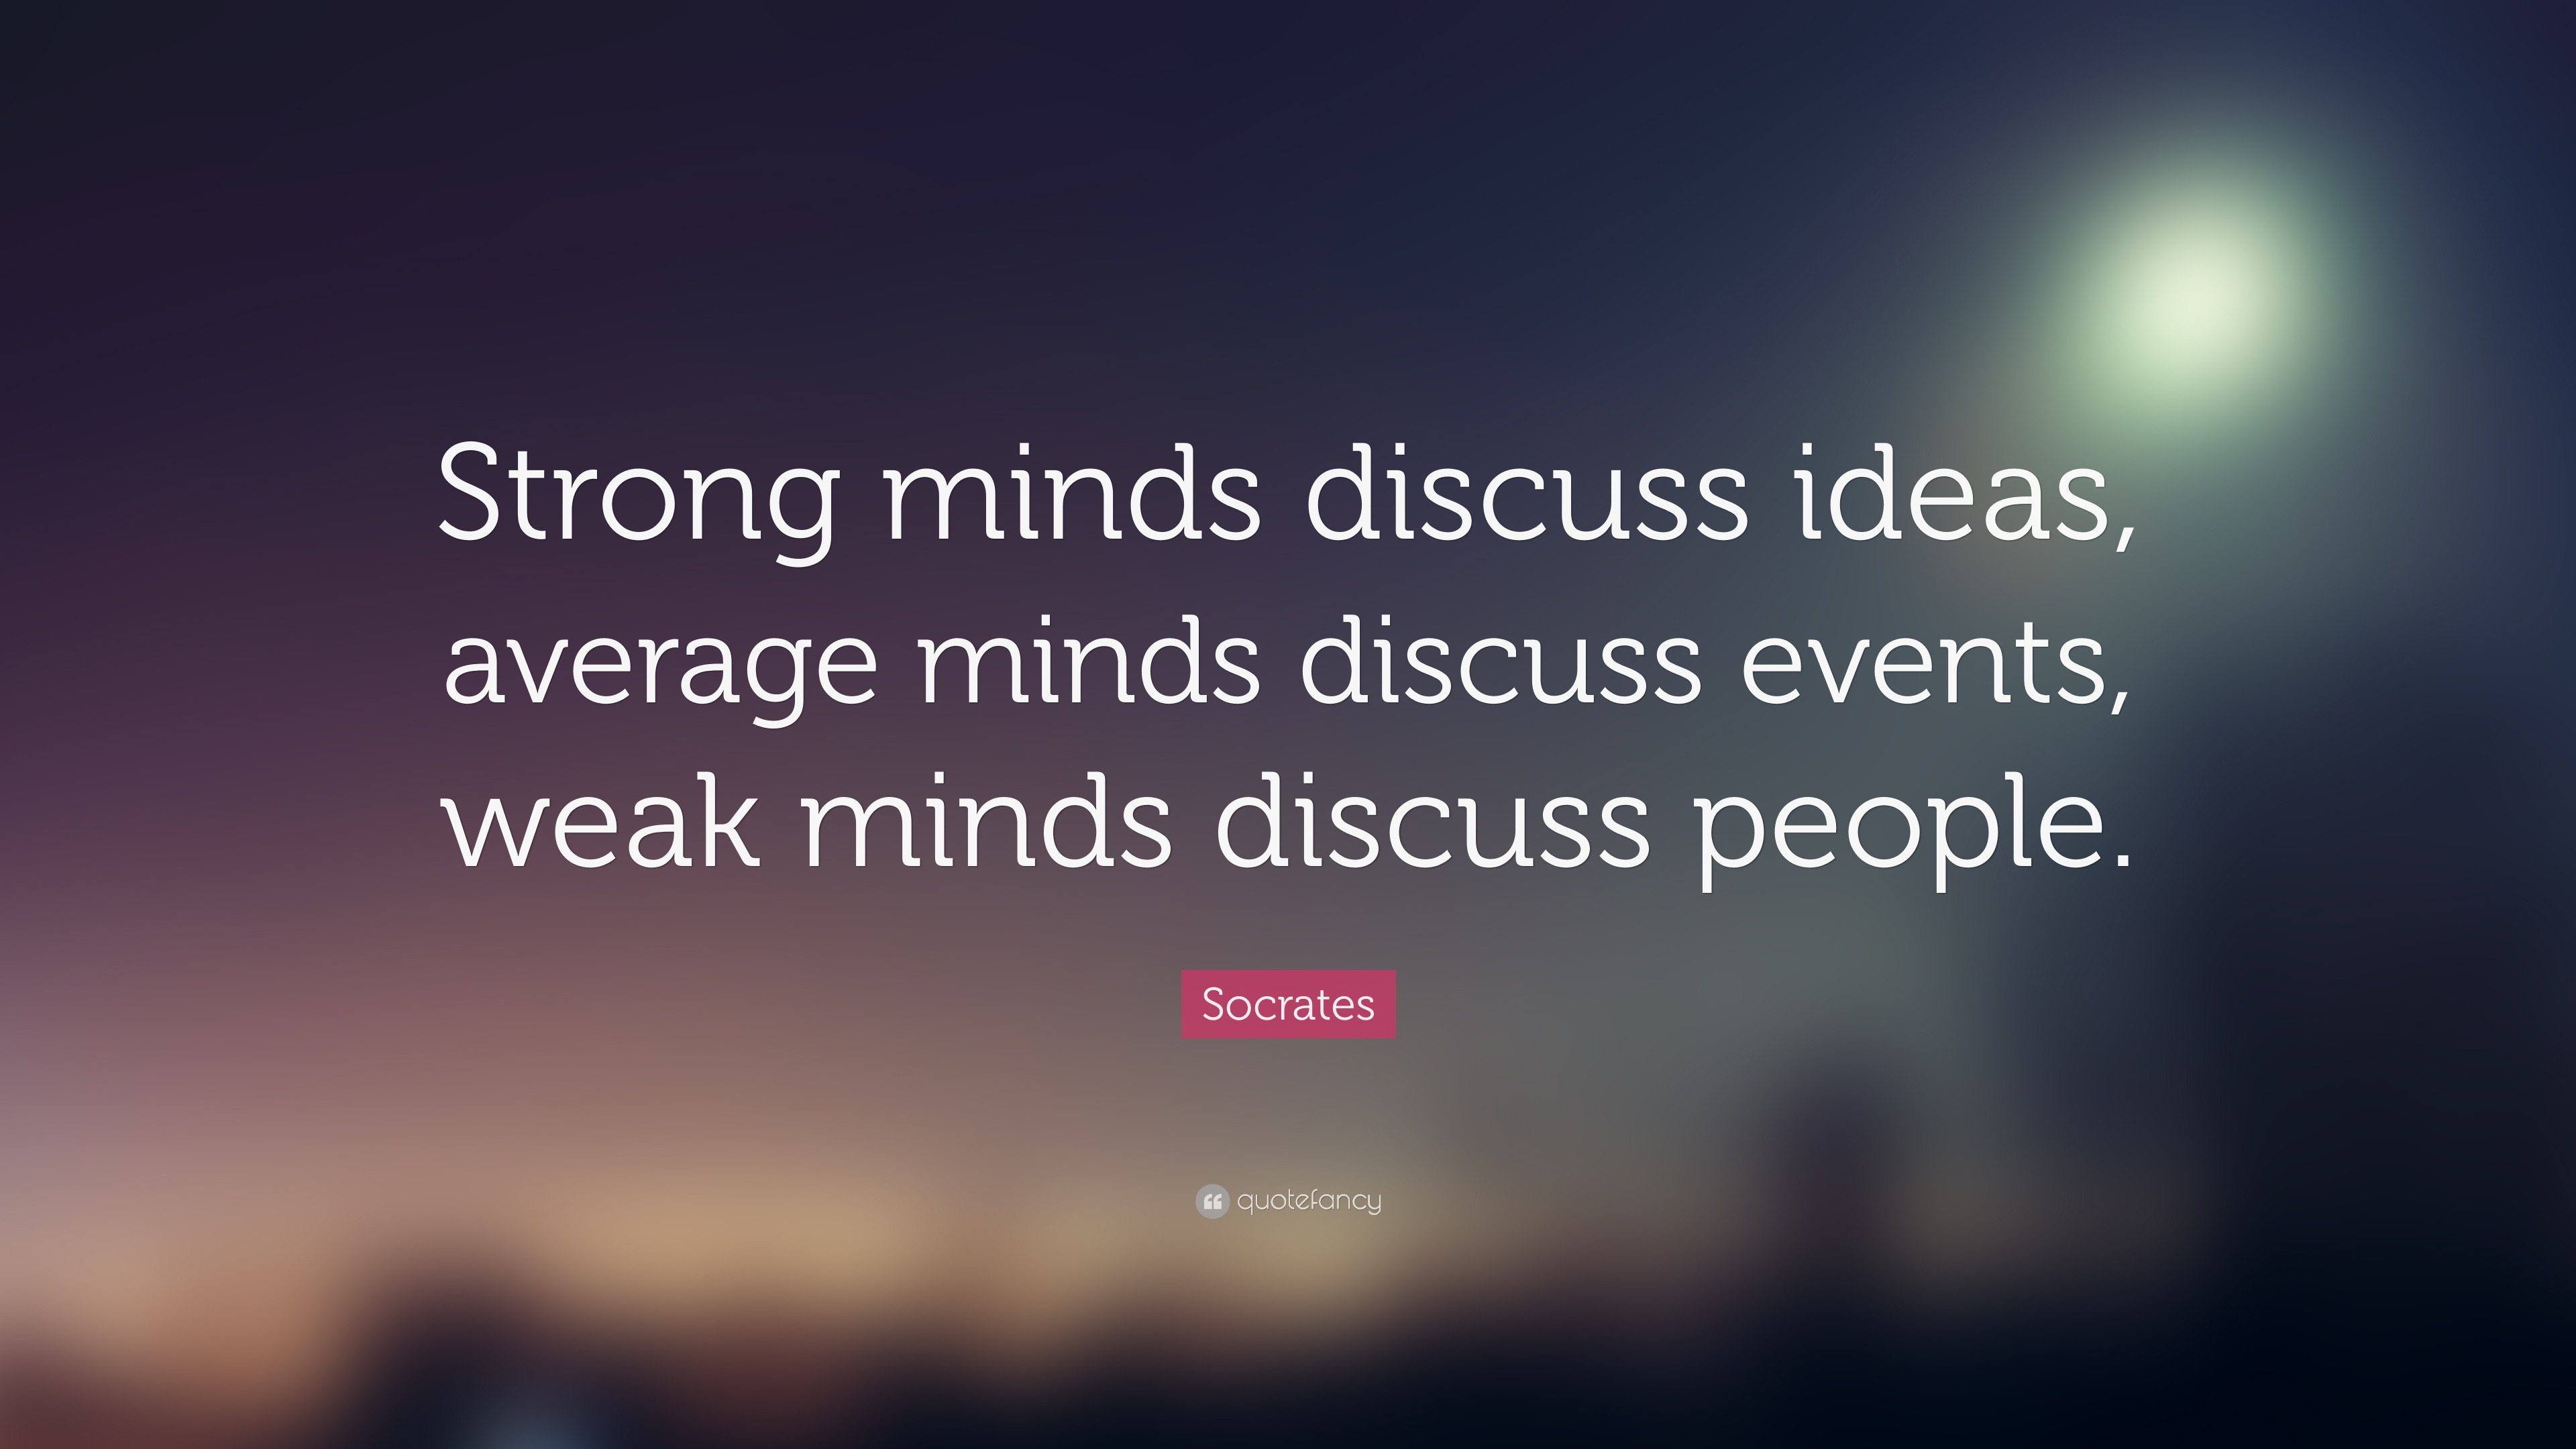 Socrates Quote: “Strong minds discuss ideas, average minds discuss